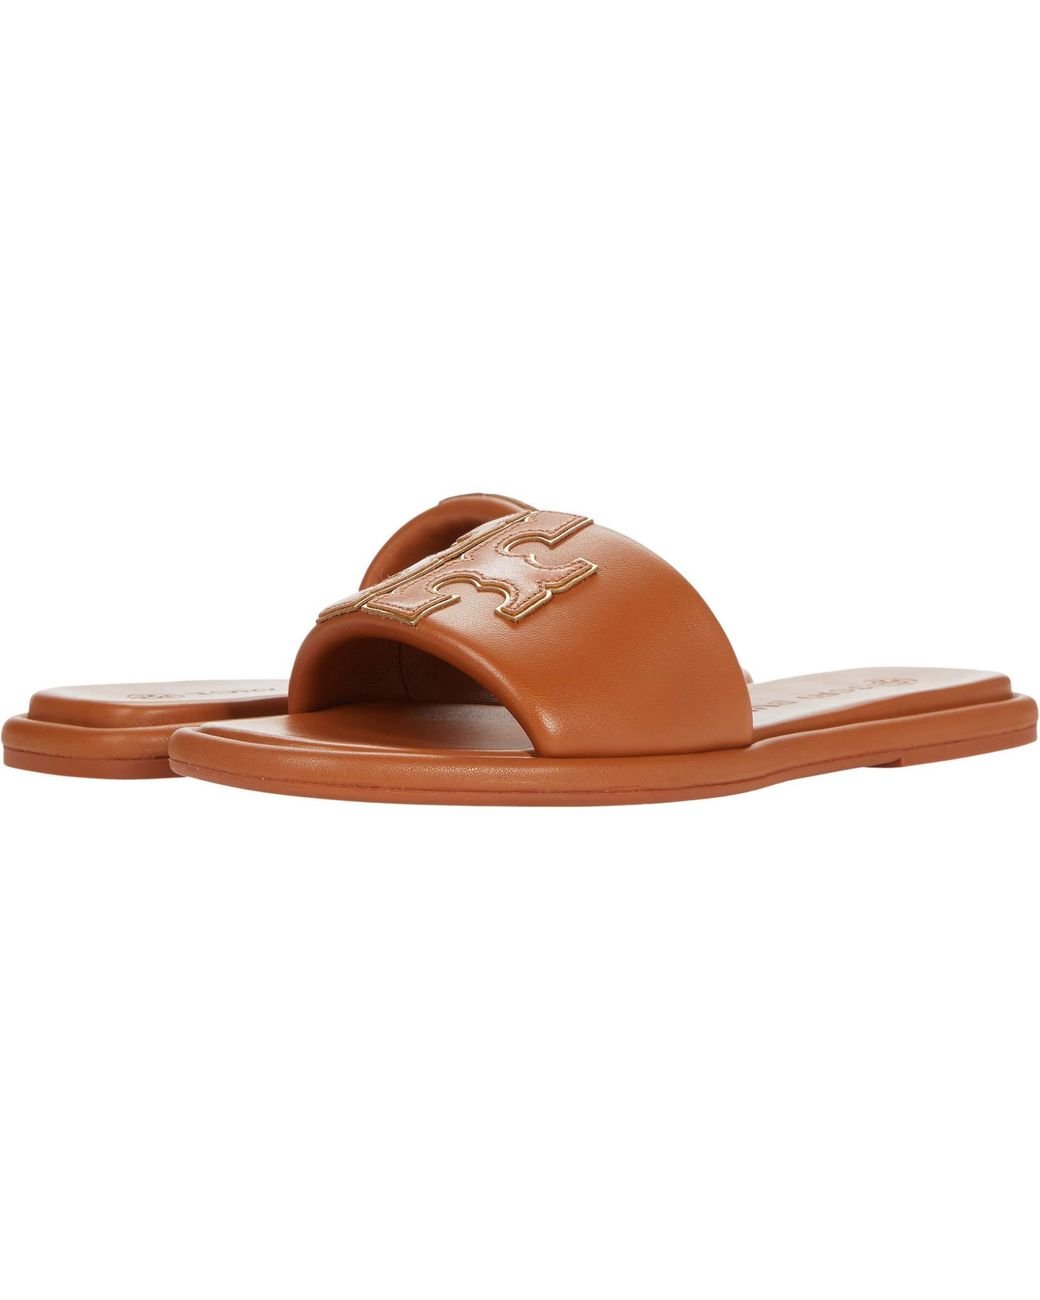 Tory Burch Leather Double T Sport Slide in Brown - Lyst